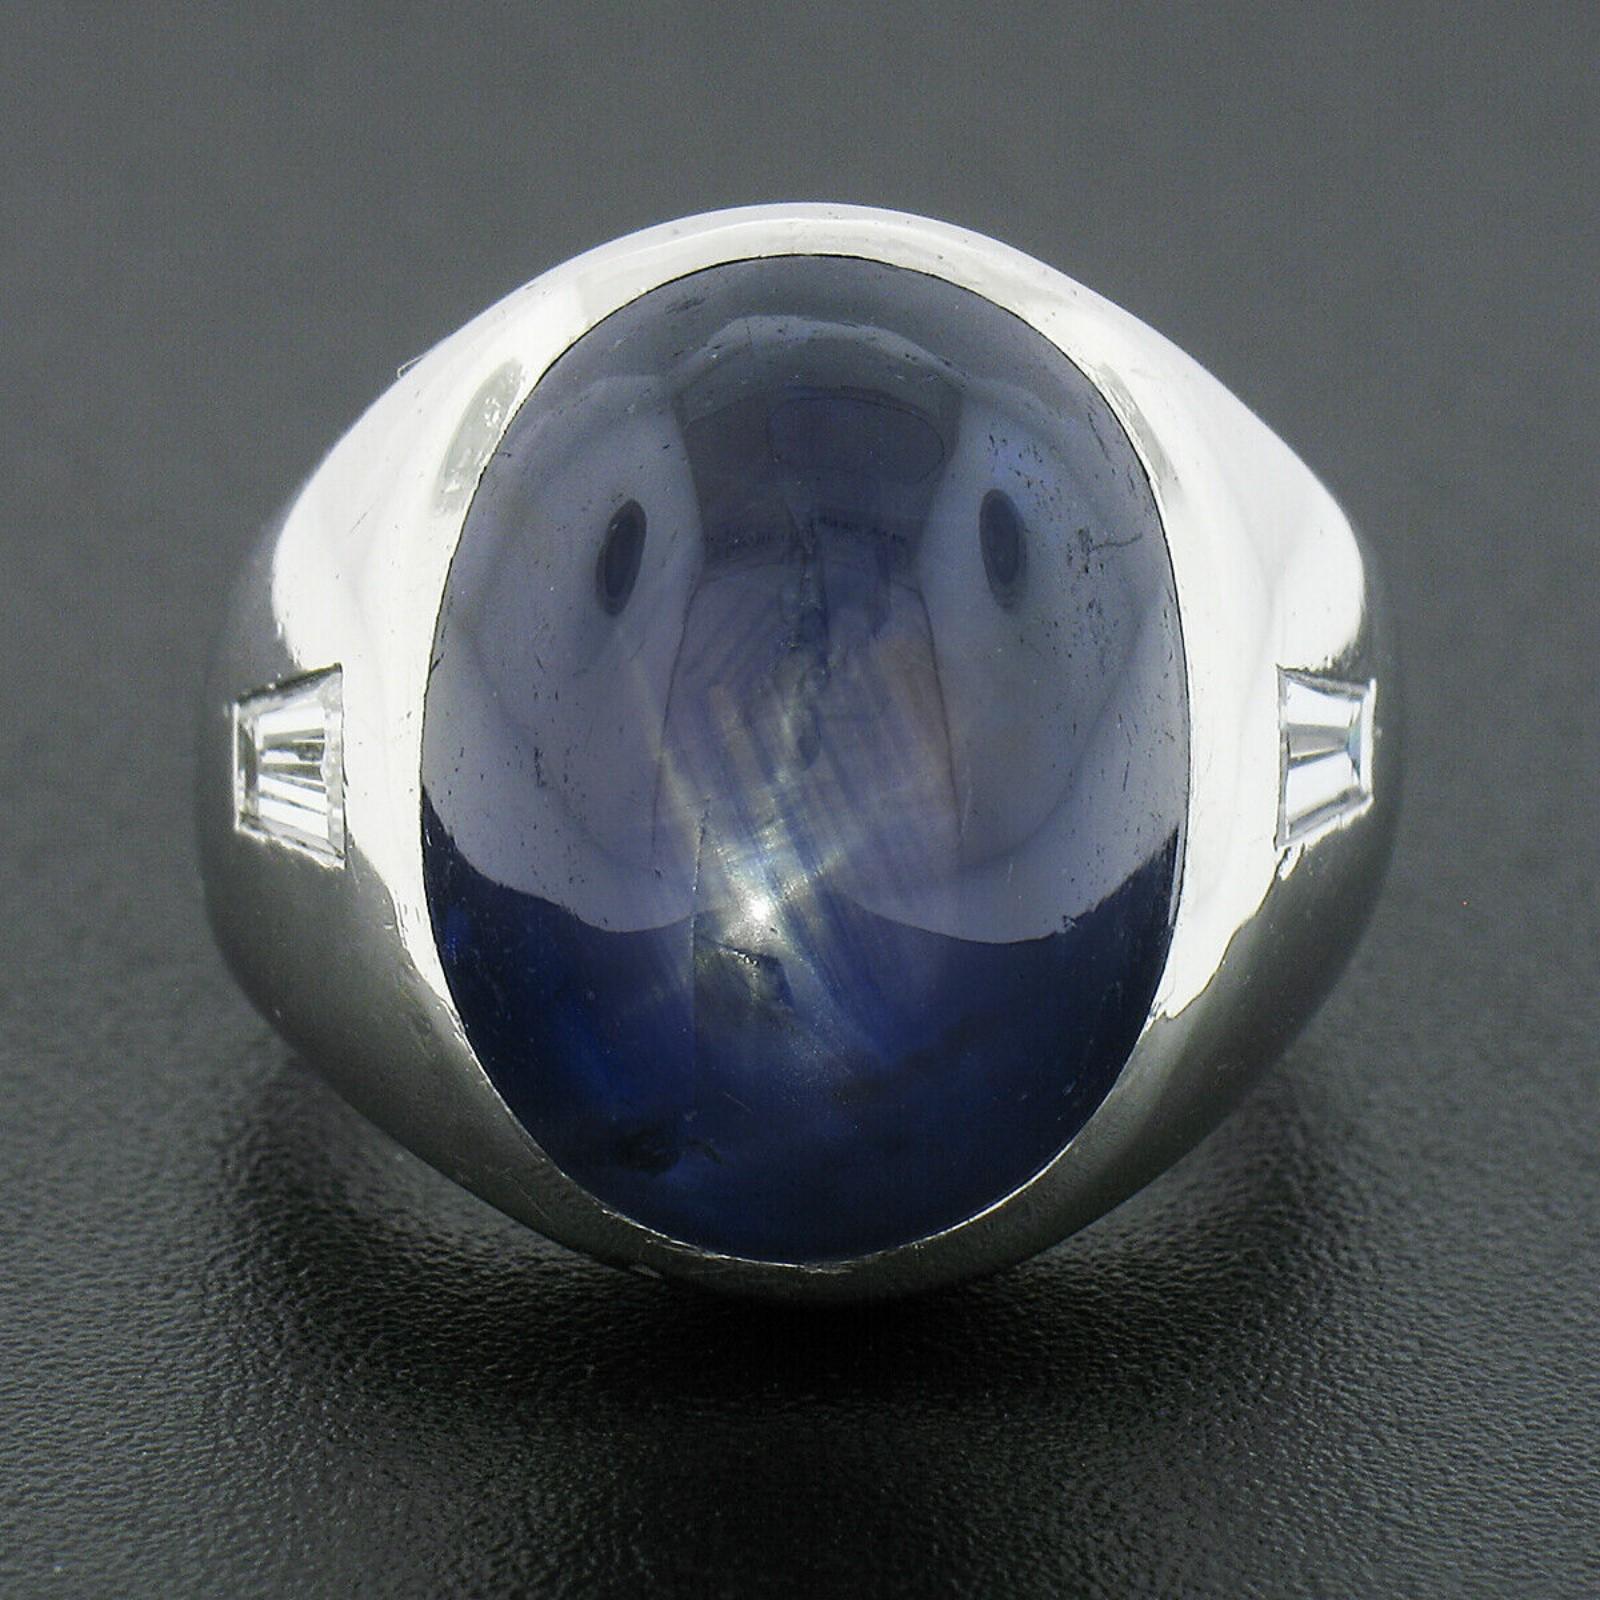 This large and heavy men's statement ring is crafted in solid platinum and features a magnificent, GIA certified, natural star sapphire bezel set at its center. The sapphire has rich and very desirable royal blue color with a well centered and